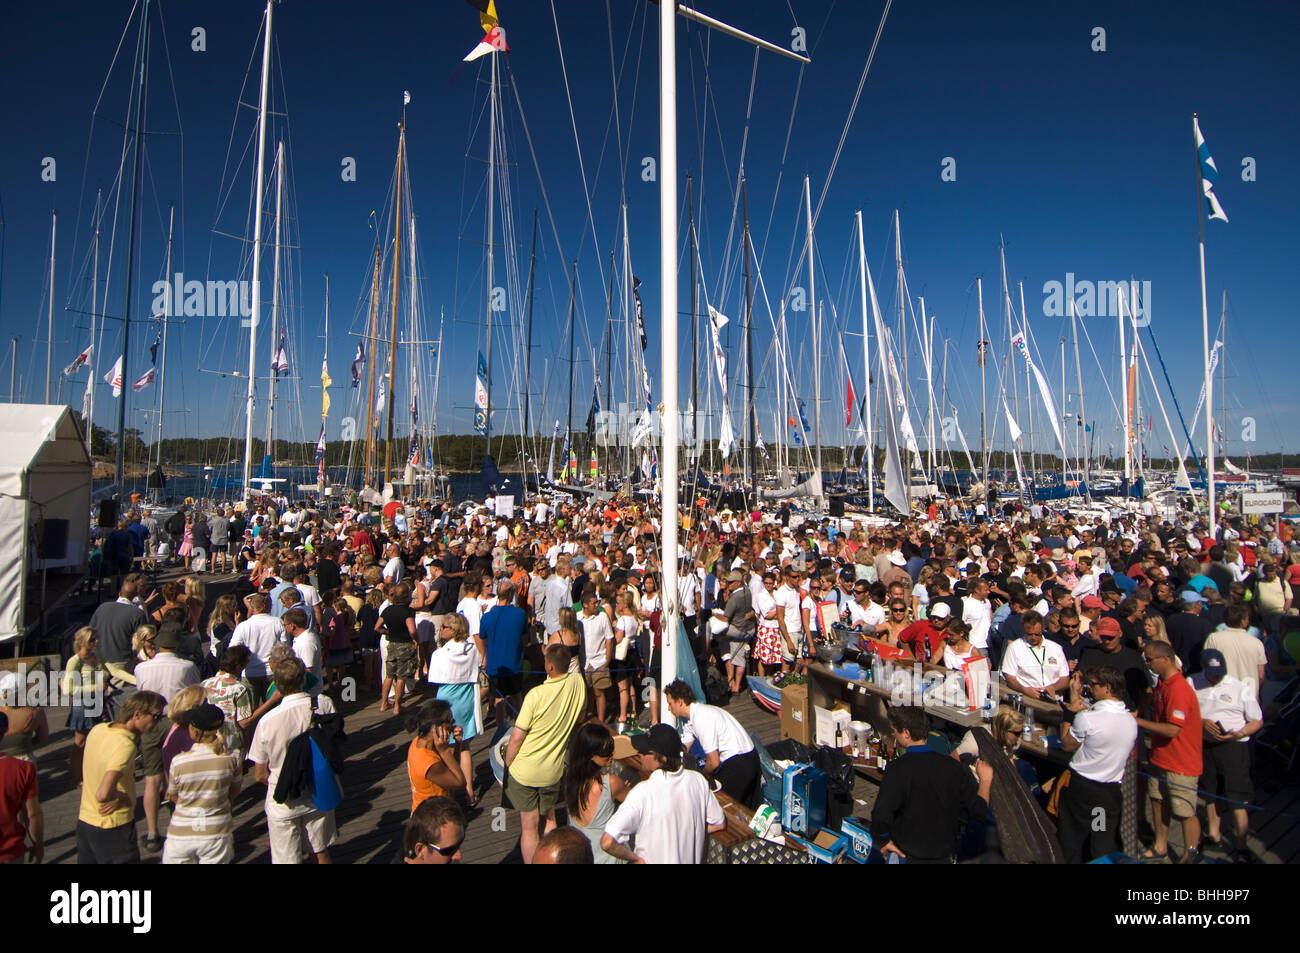 Crowd of people before the beginning of a sailing competition, Sandhamn, Stockholm archipelago, Sweden. Stock Photo